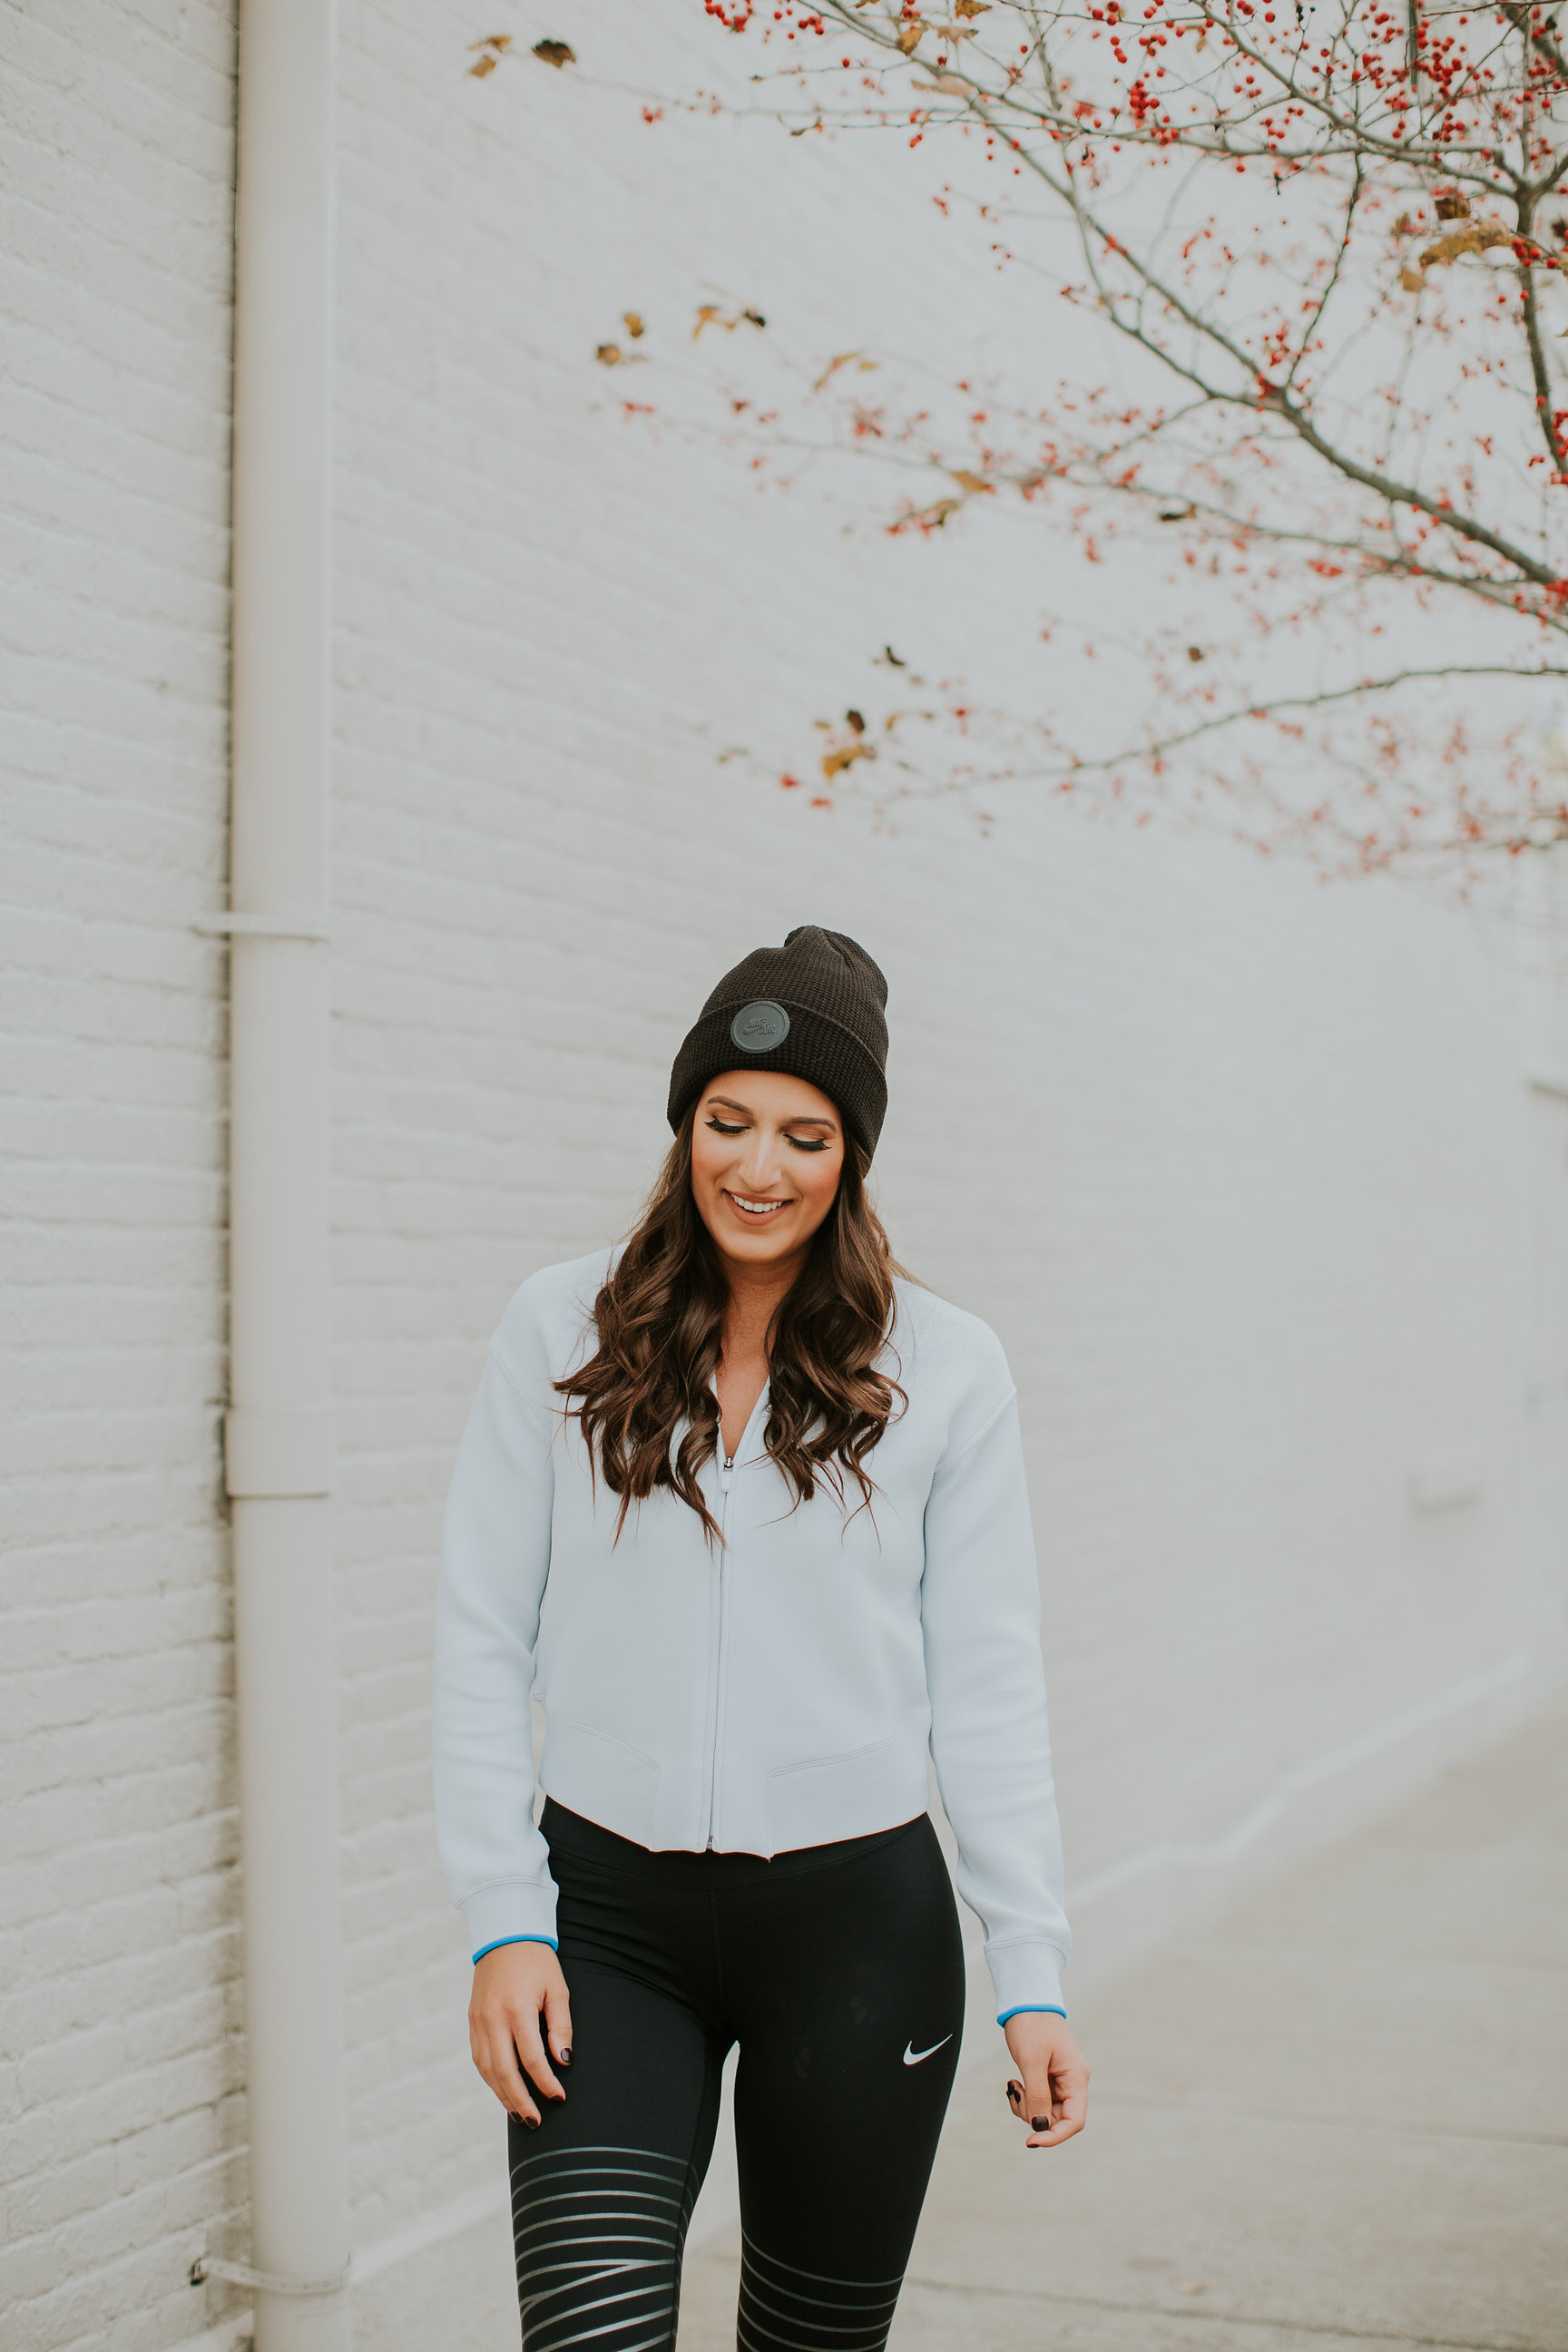 nike gift guide, nike activewear, nike air presto sneaker, nike holiday gift guide, christmas gift guide, nike beanie, nike hat, nike jacket, nike epic lux leggings, nike athleisure, a southern drawl fitness, fitspiration, leg workout guide // grace wainwright a southern drawl